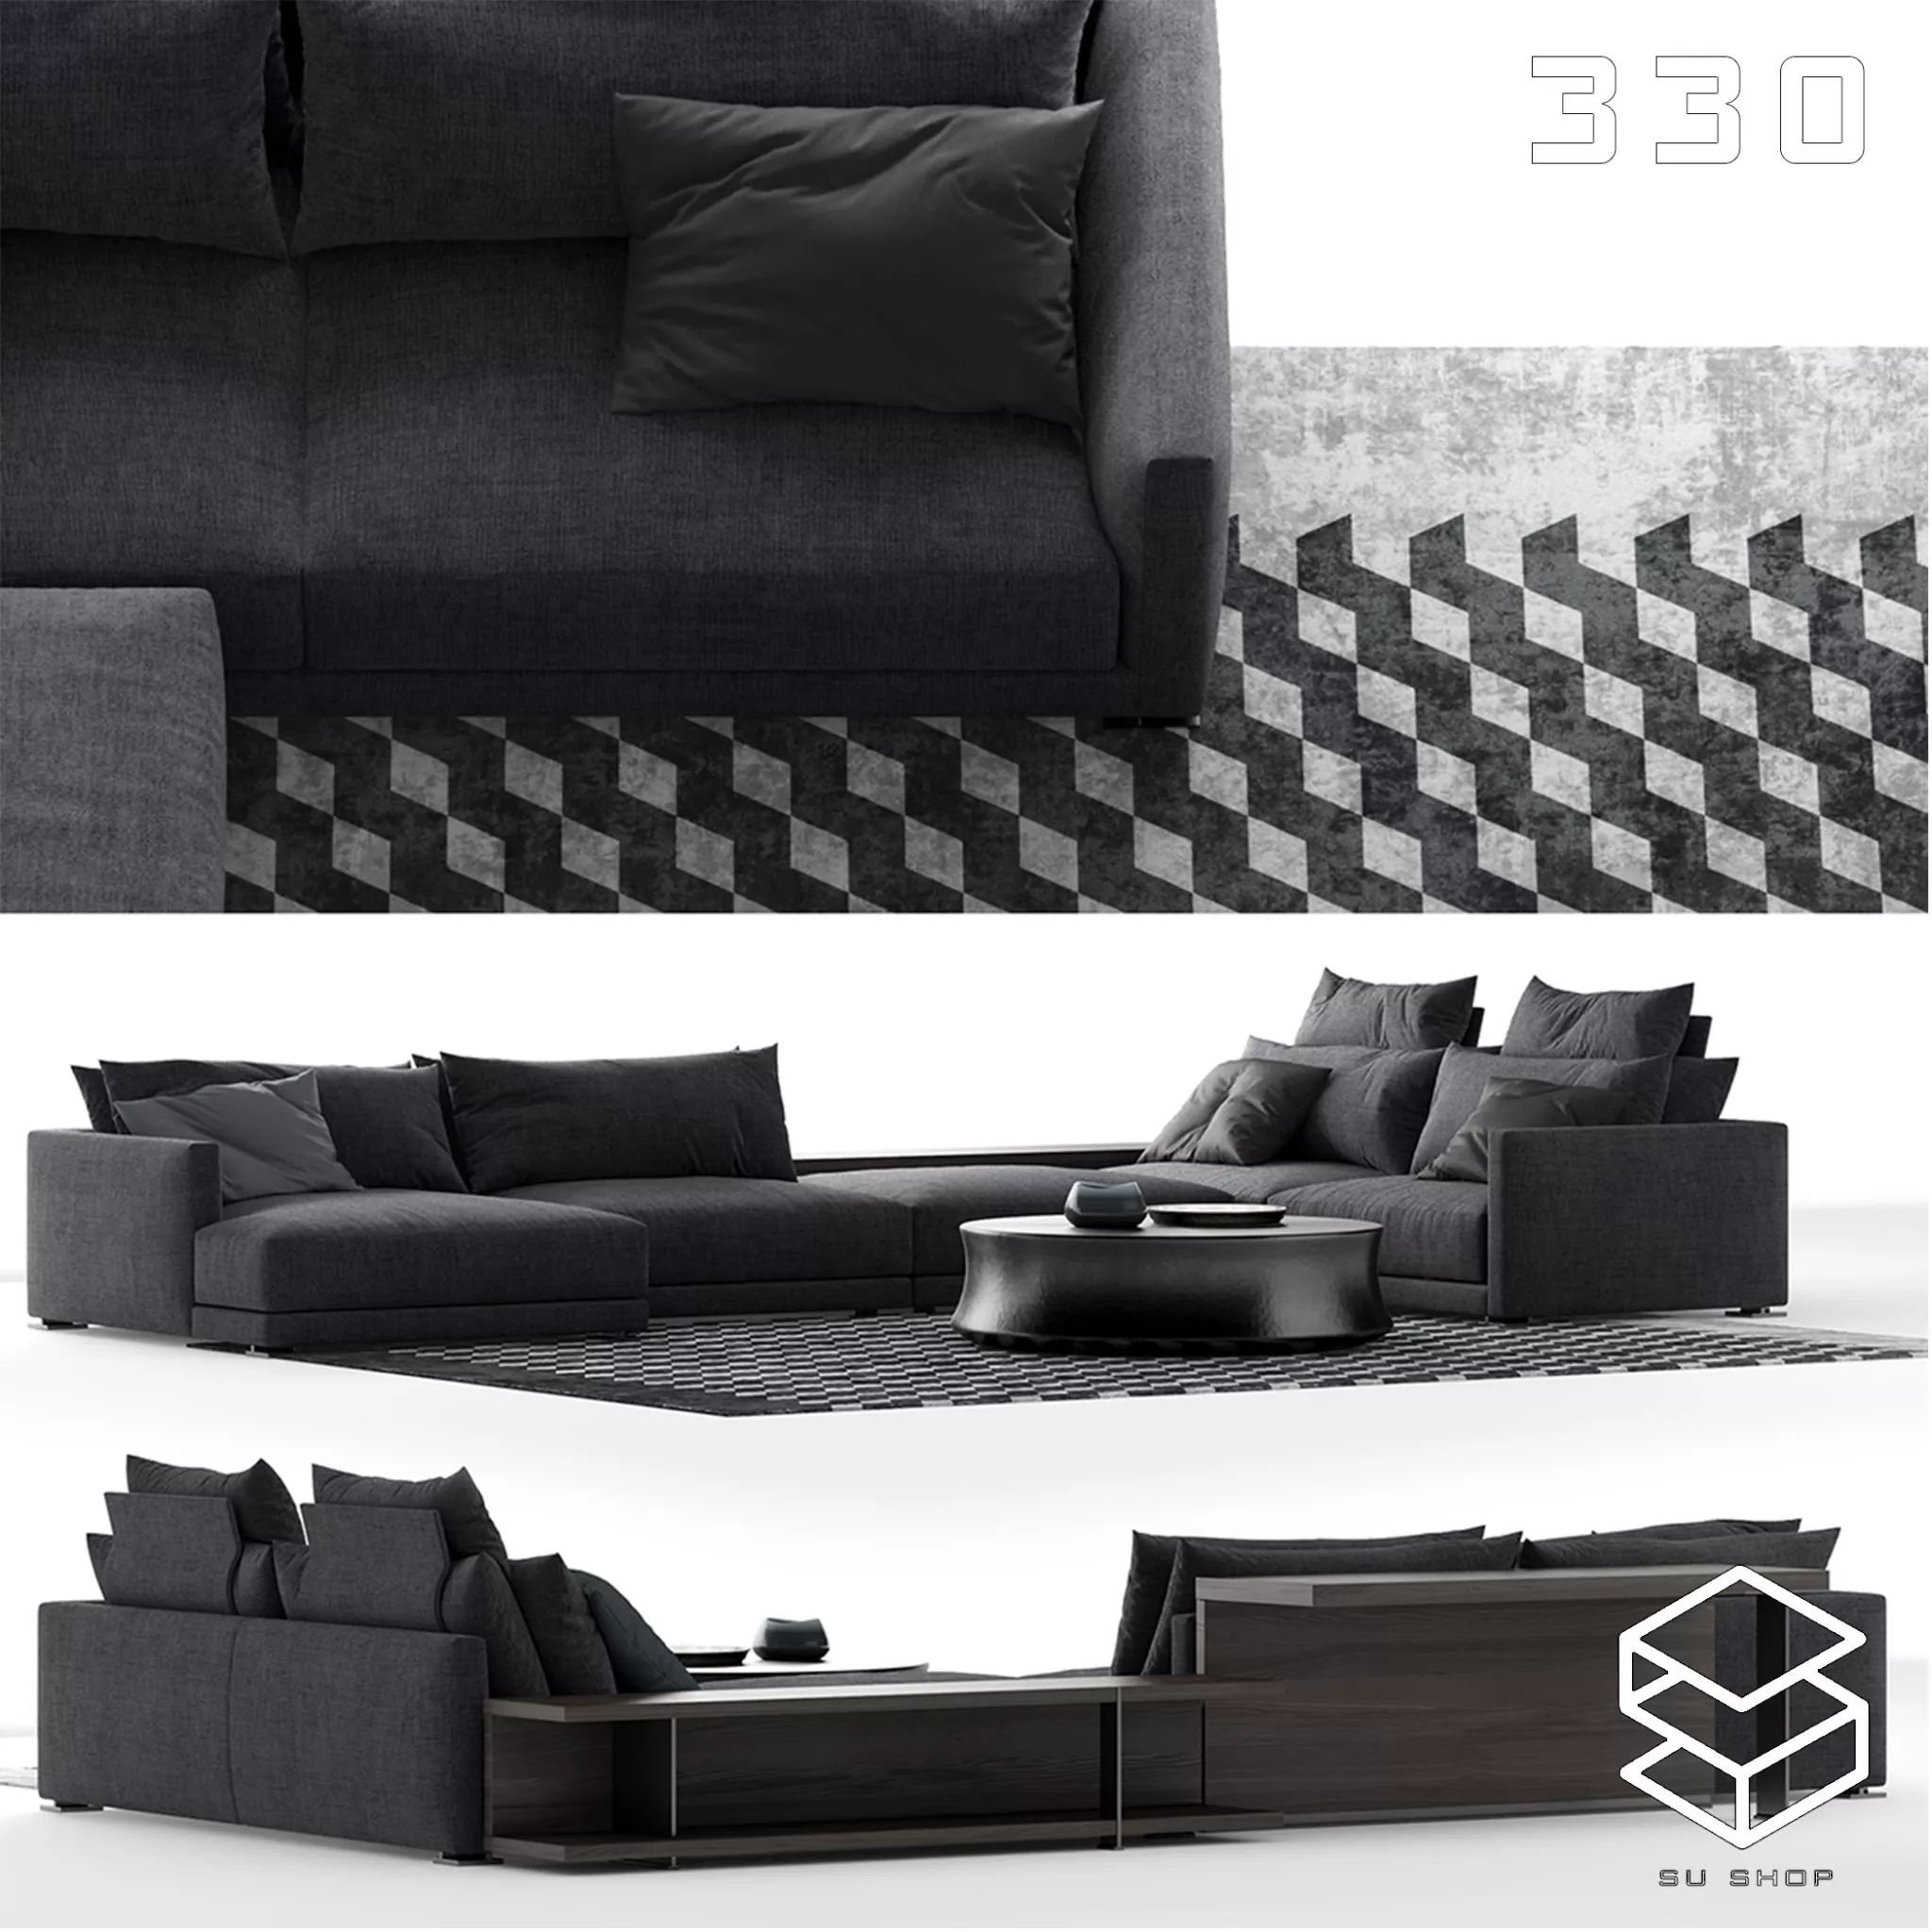 MODERN SOFA - SKETCHUP 3D MODEL - VRAY OR ENSCAPE - ID13642